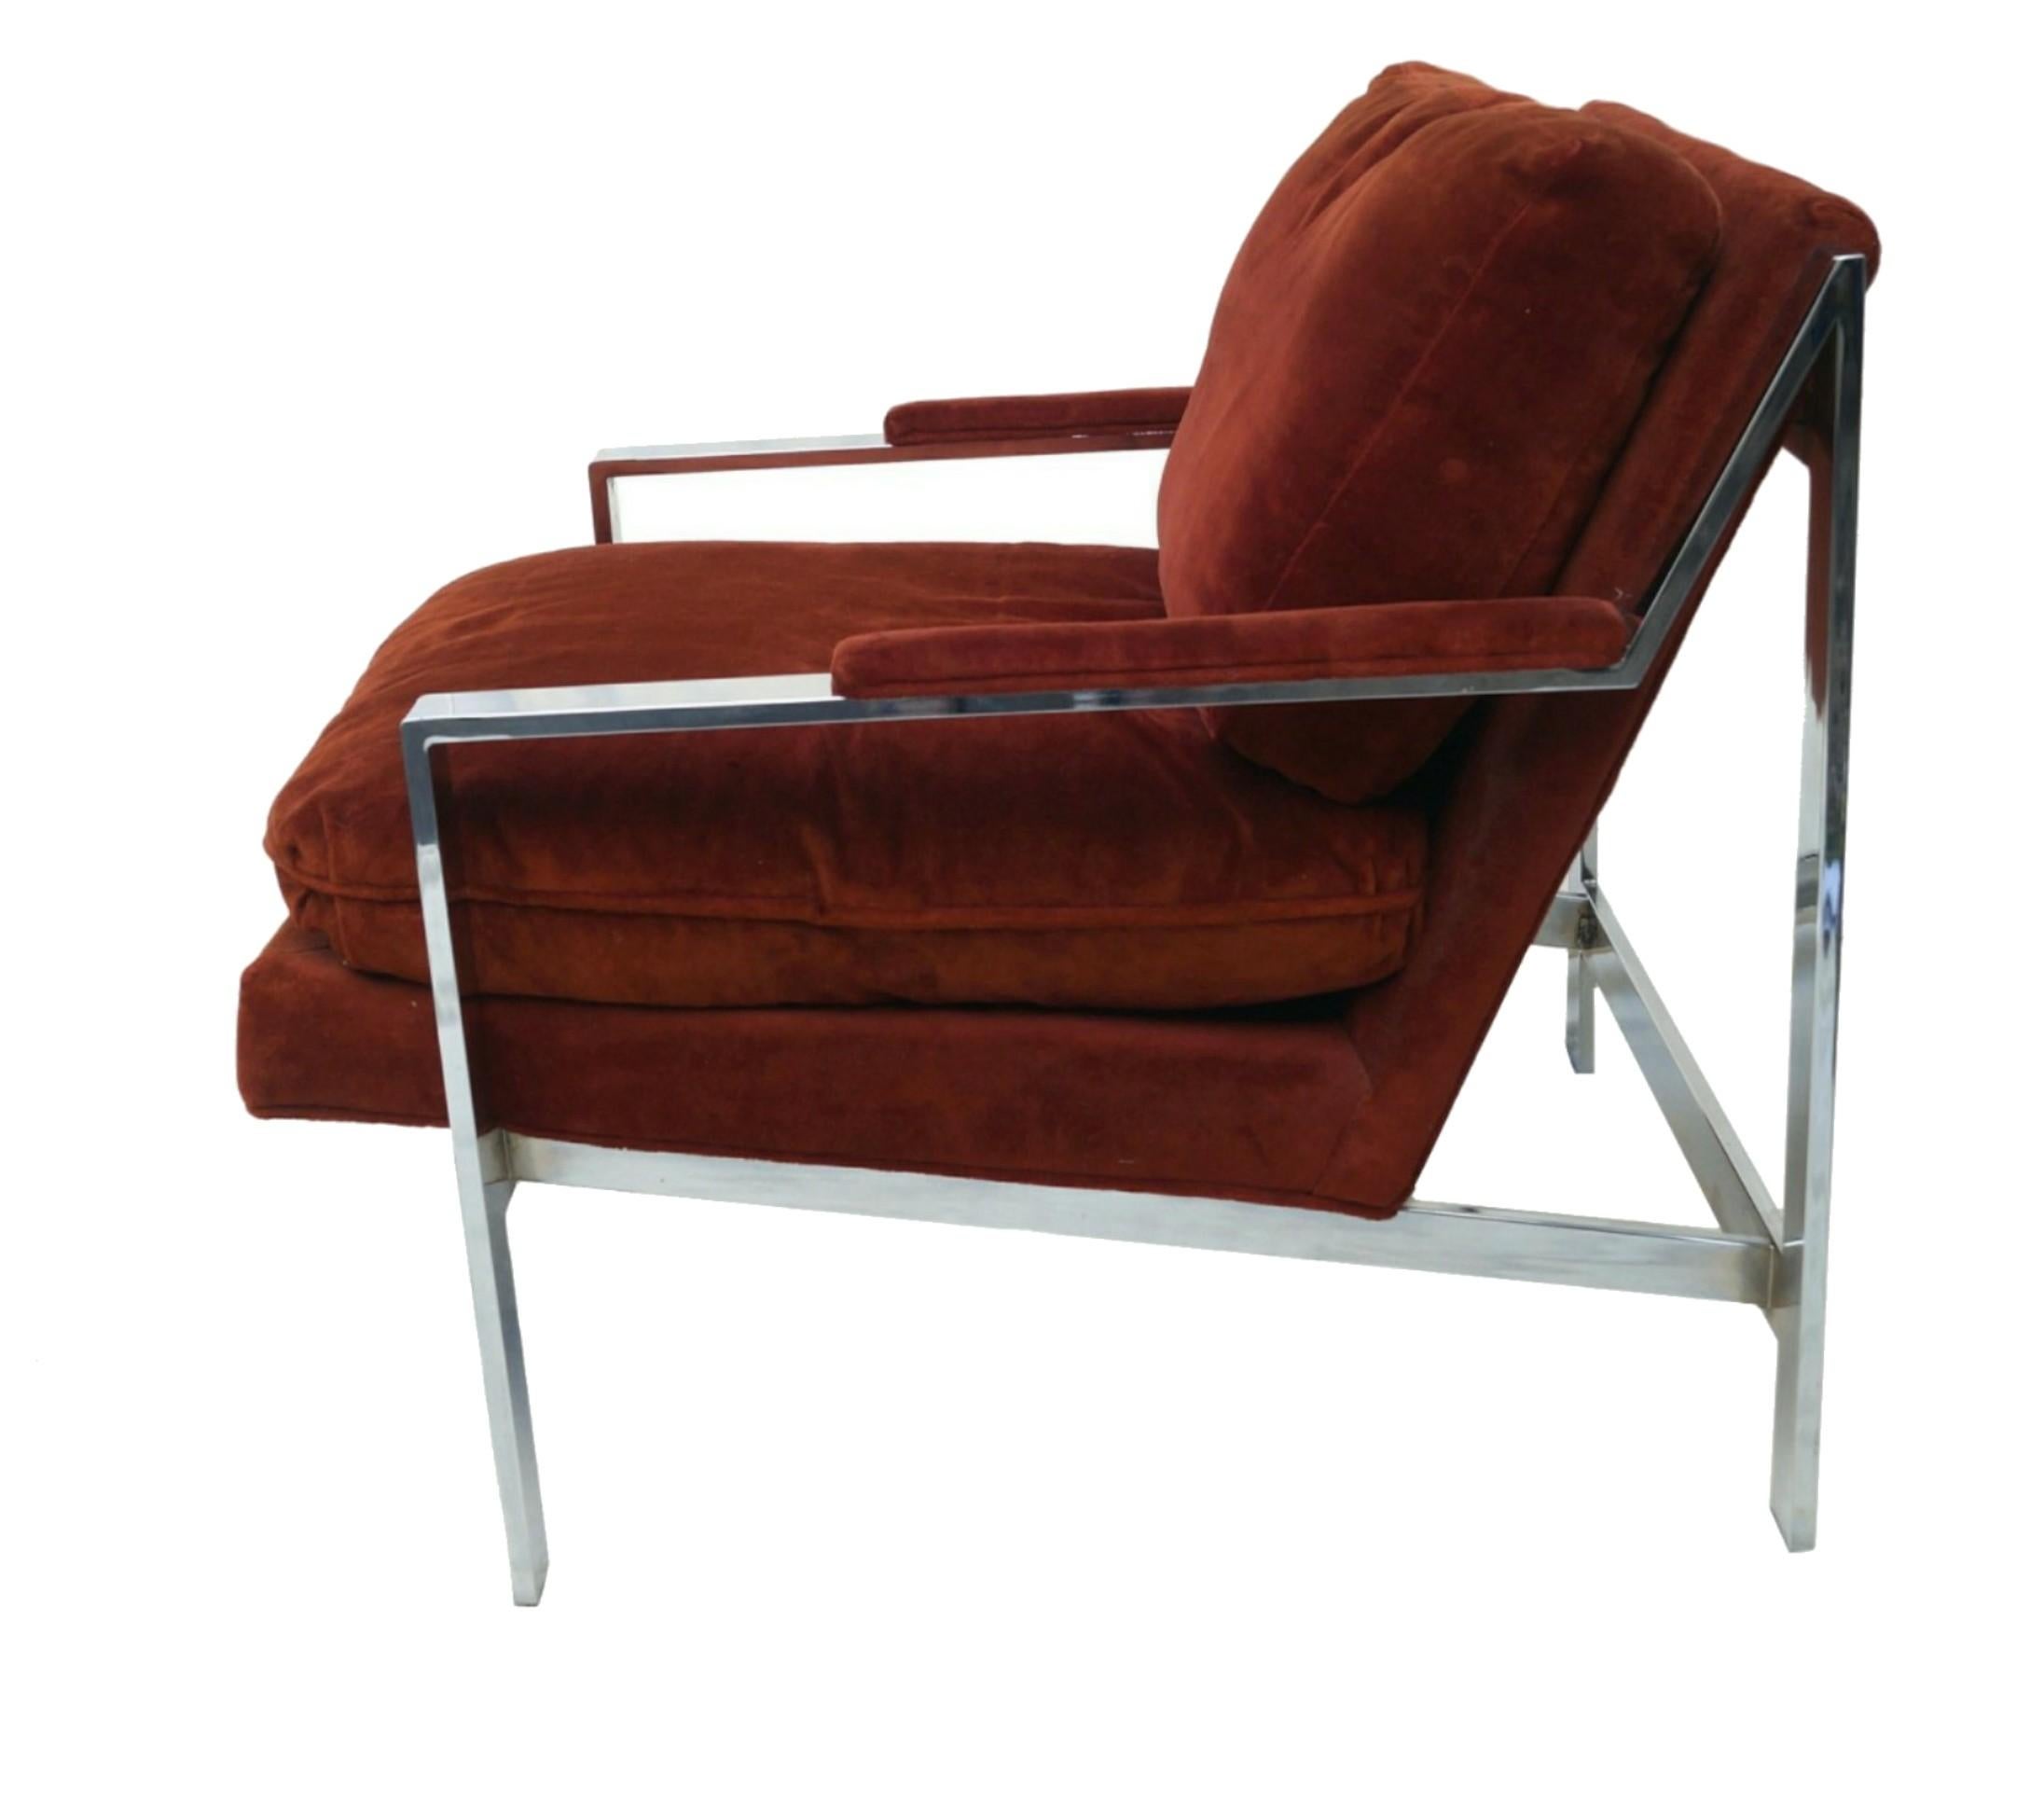 Late 20th Century Pair of Cy Mann Mid-Century Modern Chrome Lounge Chairs